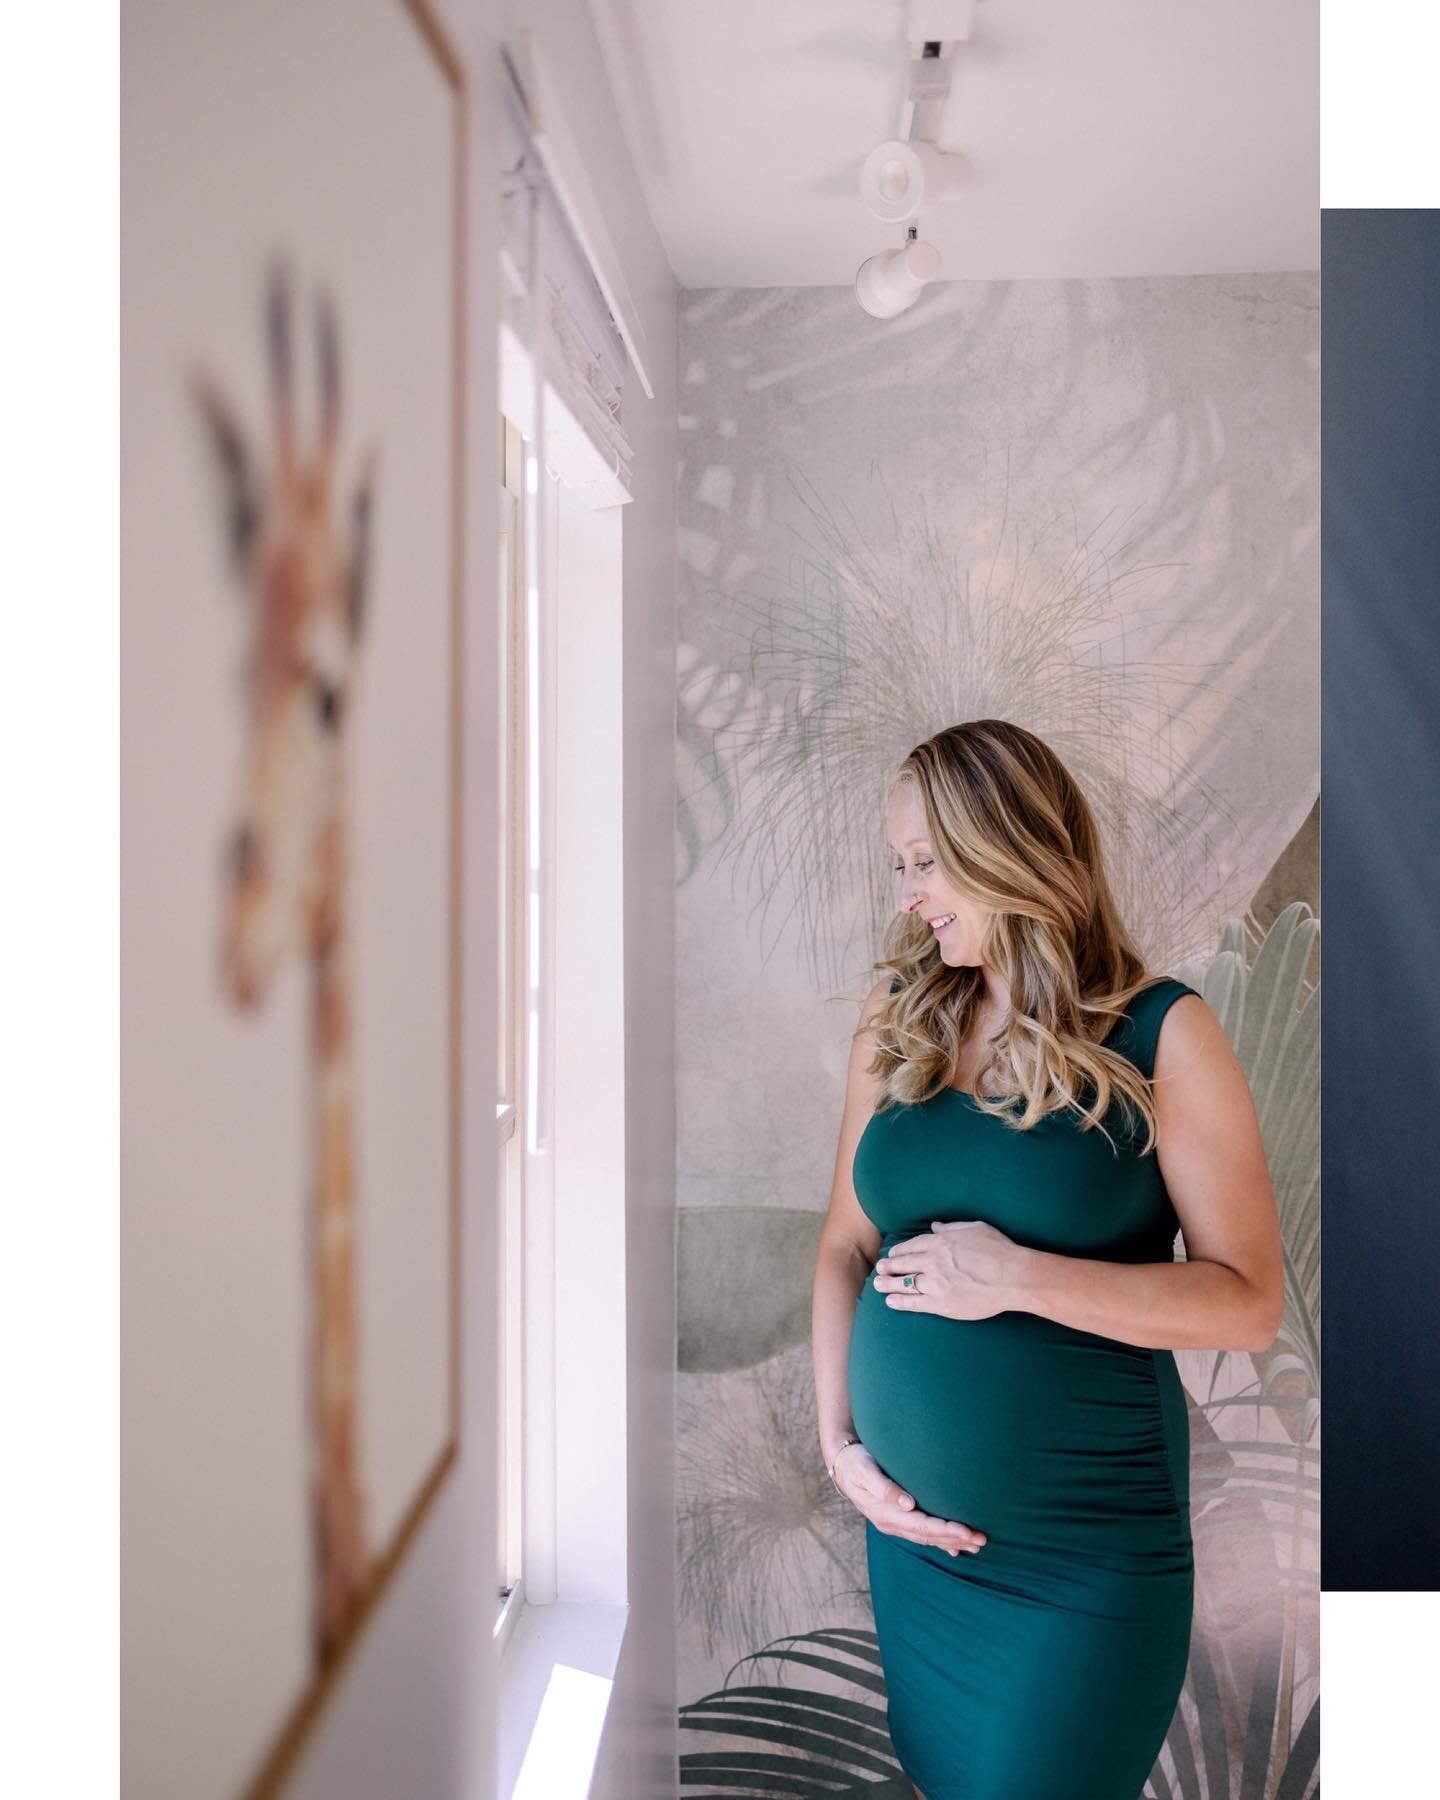 Wanted to share a few photos of this picture perfect bump before the babe beat me to it. Happiest Mother&rsquo;s Day to all the mamas and soon-to-be mamas too &lt;3 

#babybump #love